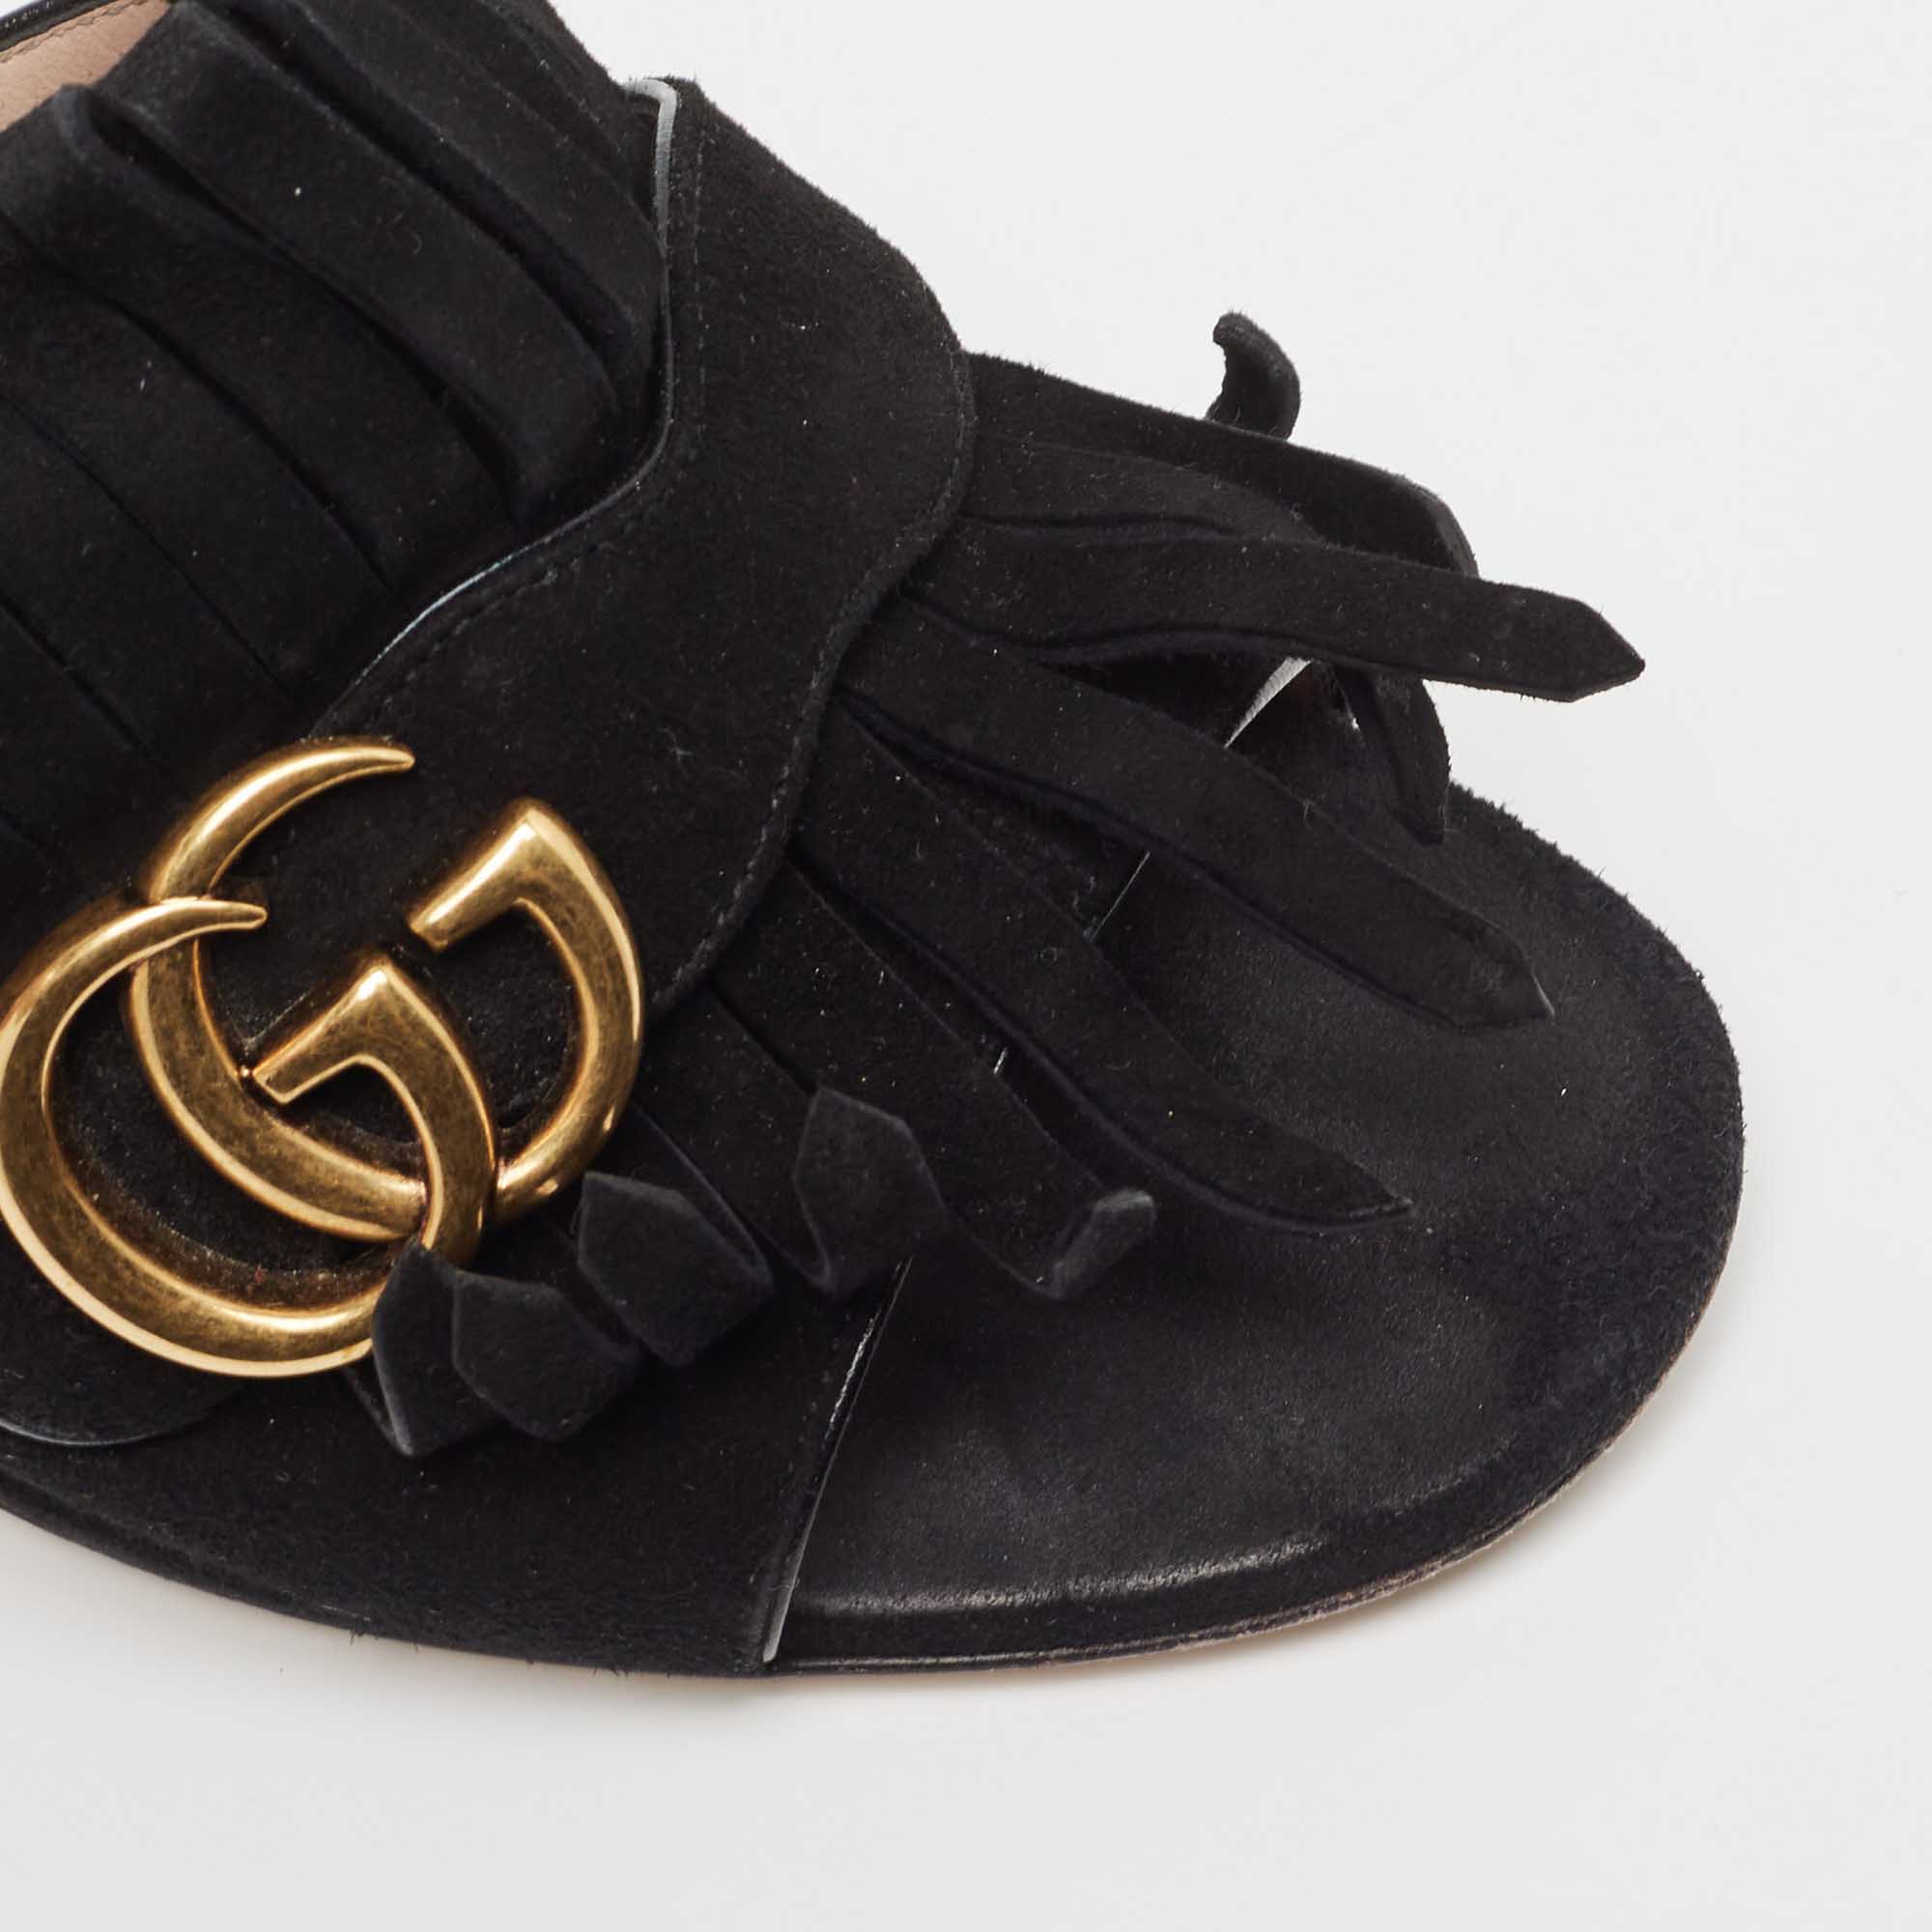 Gucci Black Suede GG Marmont Fringe Mules Size 37